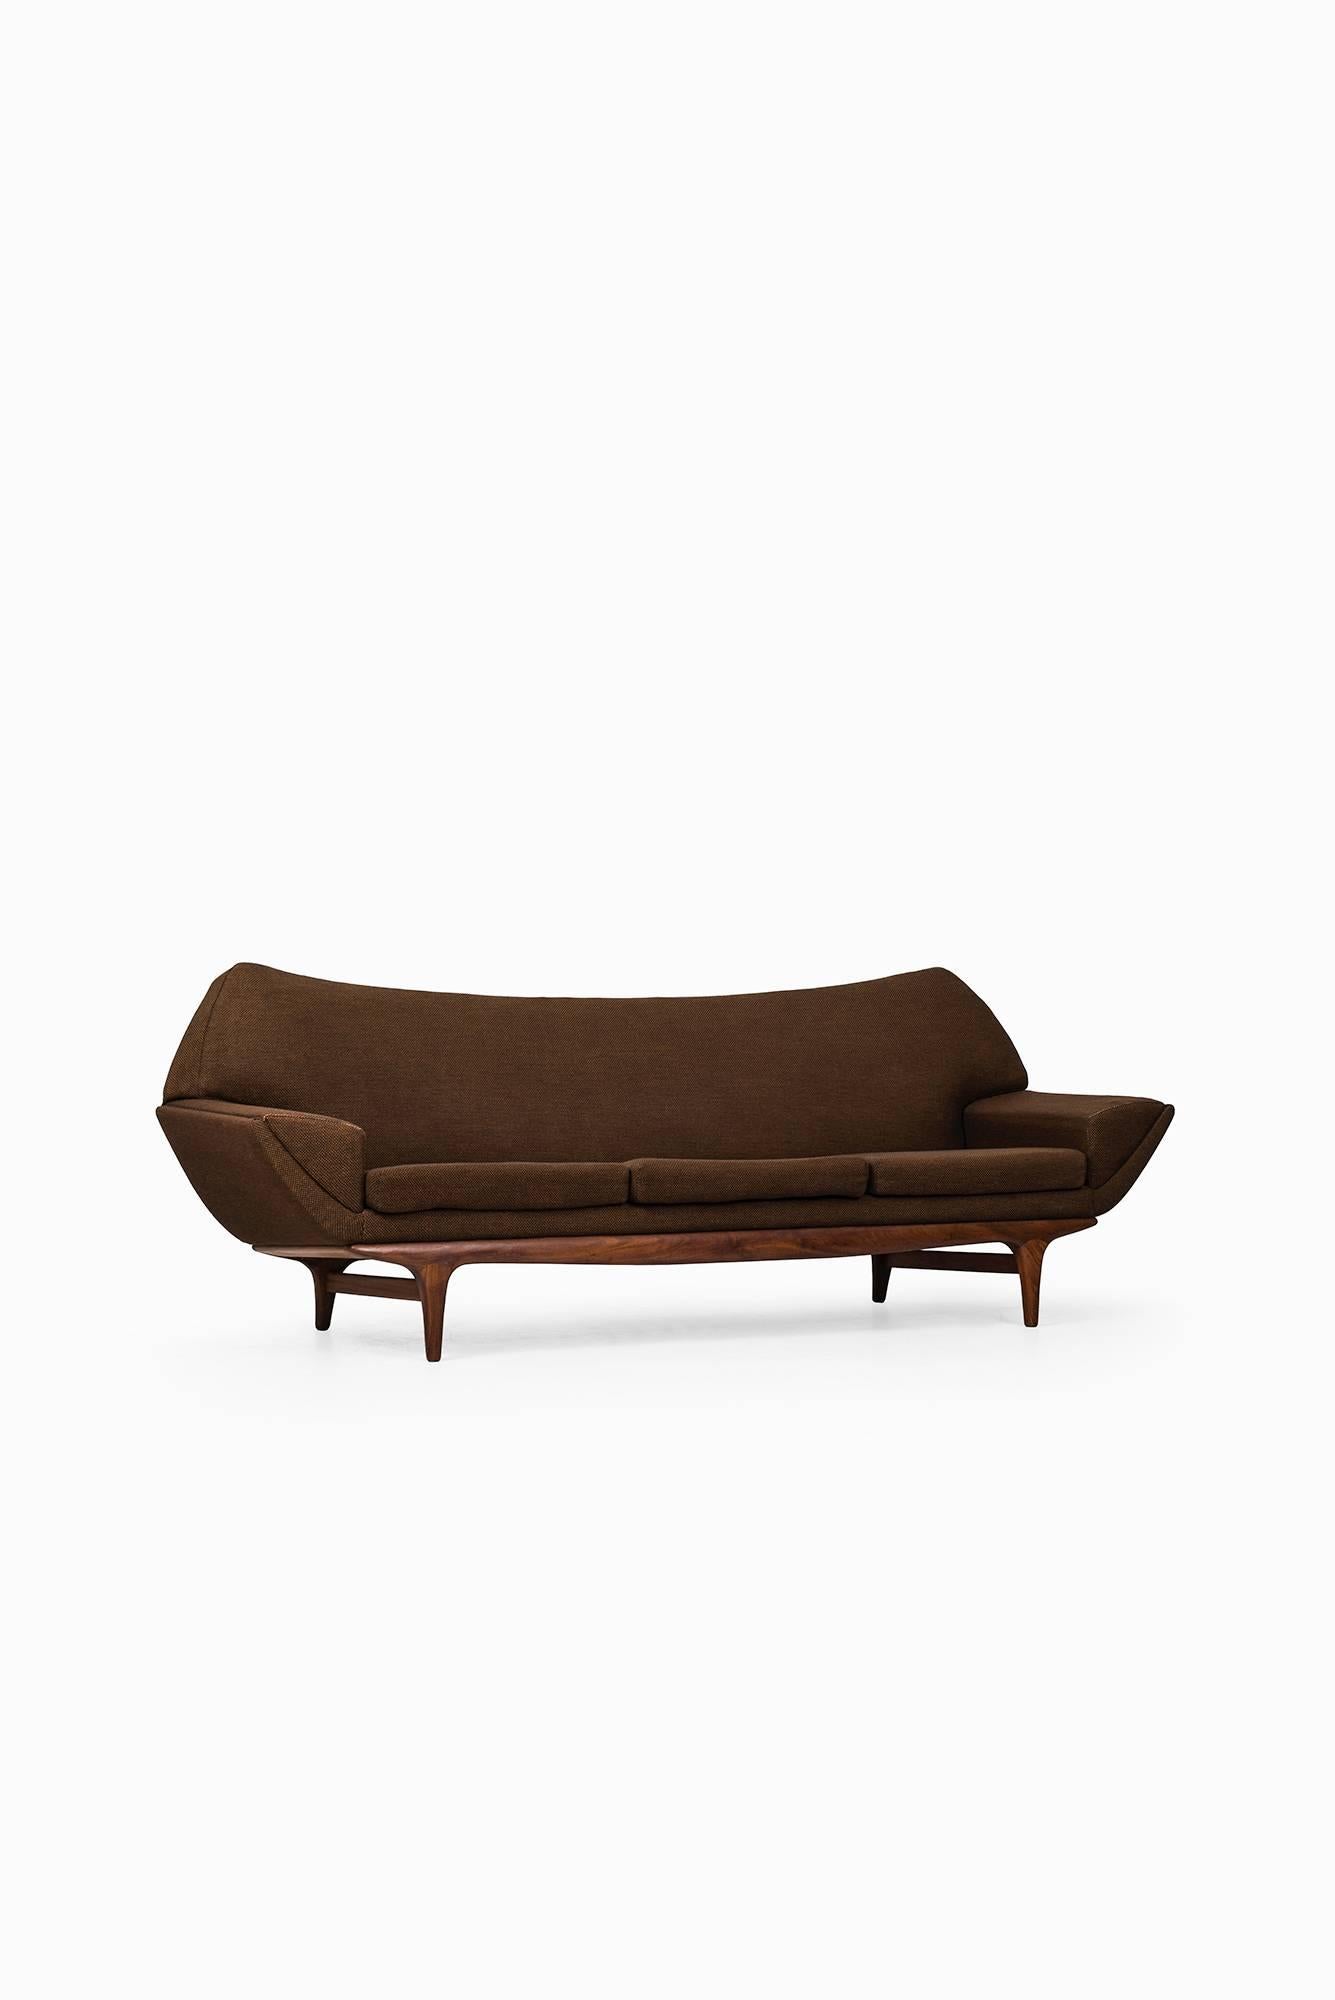 Very rare and early sofa designed by Johannes Andersen. Produced by Trensums in Sweden.